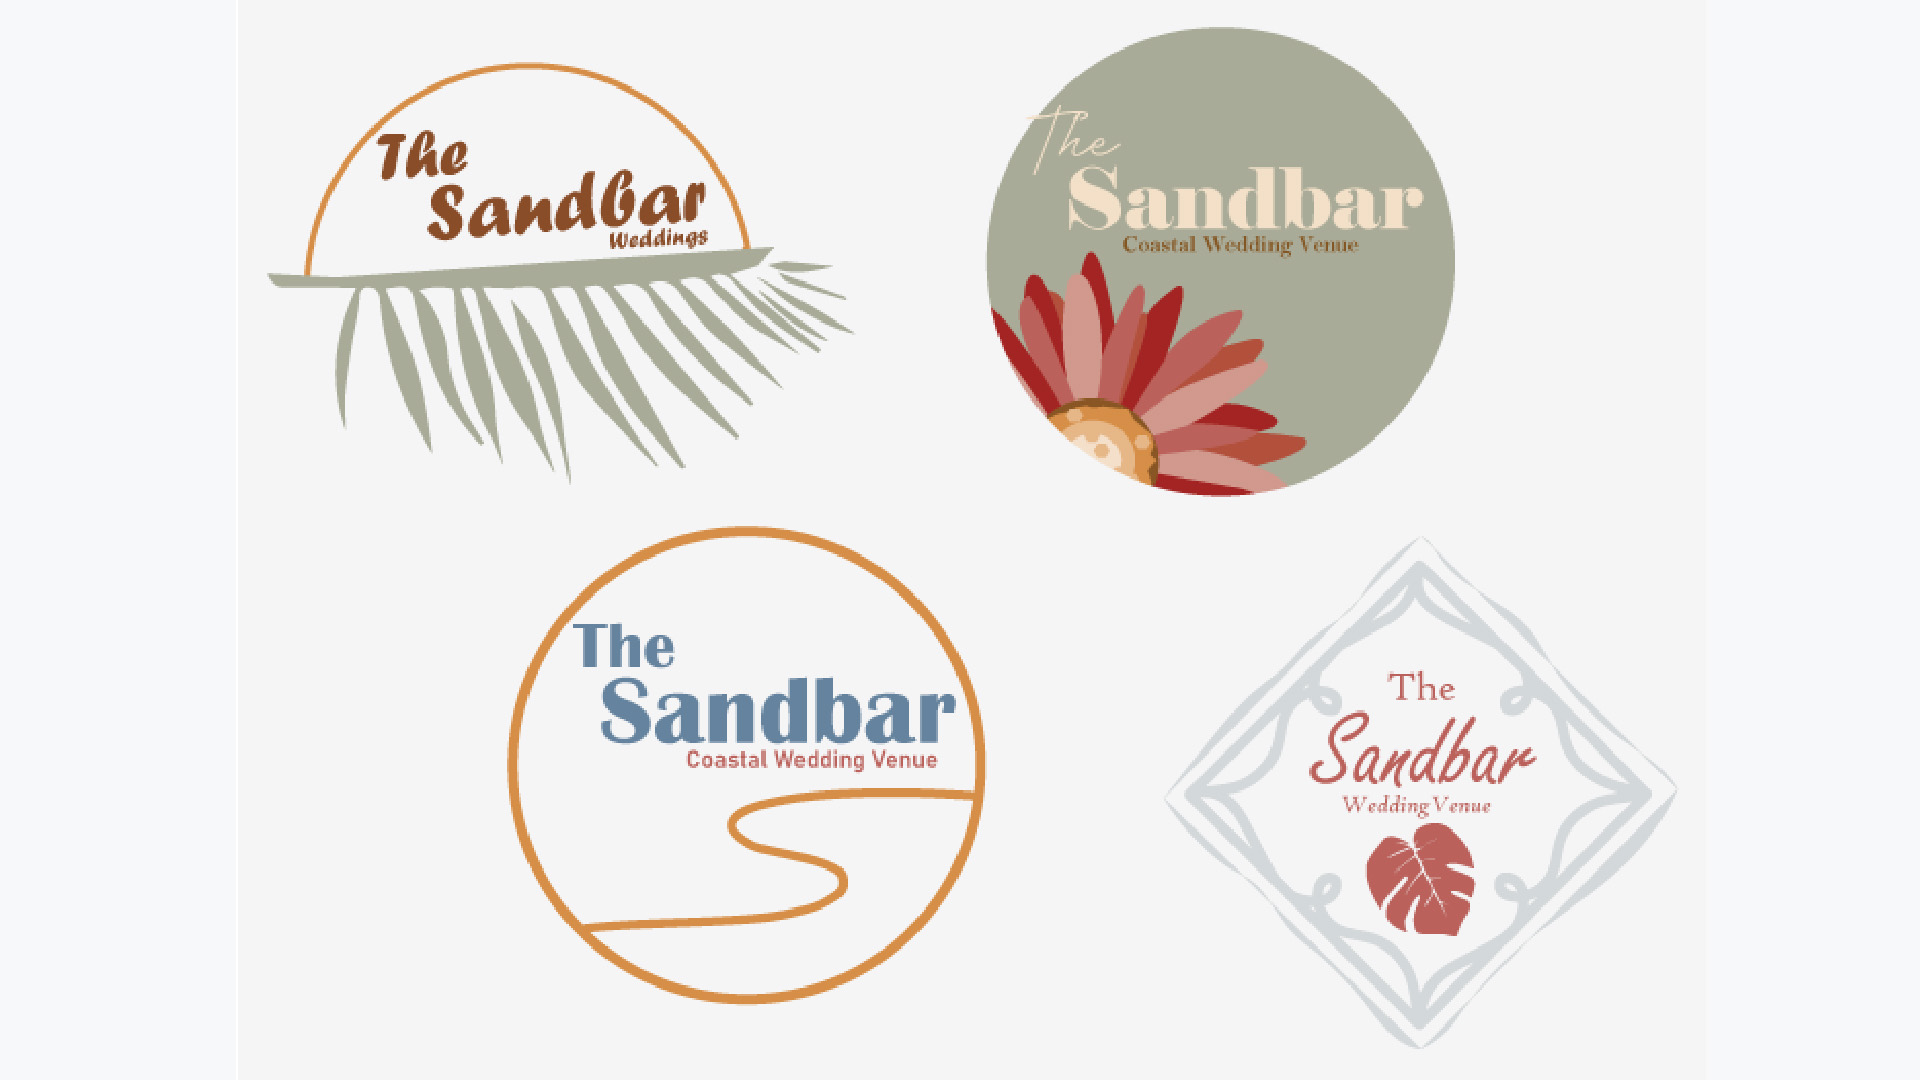 SandBar Weddings / SandBar Weddings, wedding venue logo exploration, 2023. These logos were an exploration of four logo variants for a wedding venue.